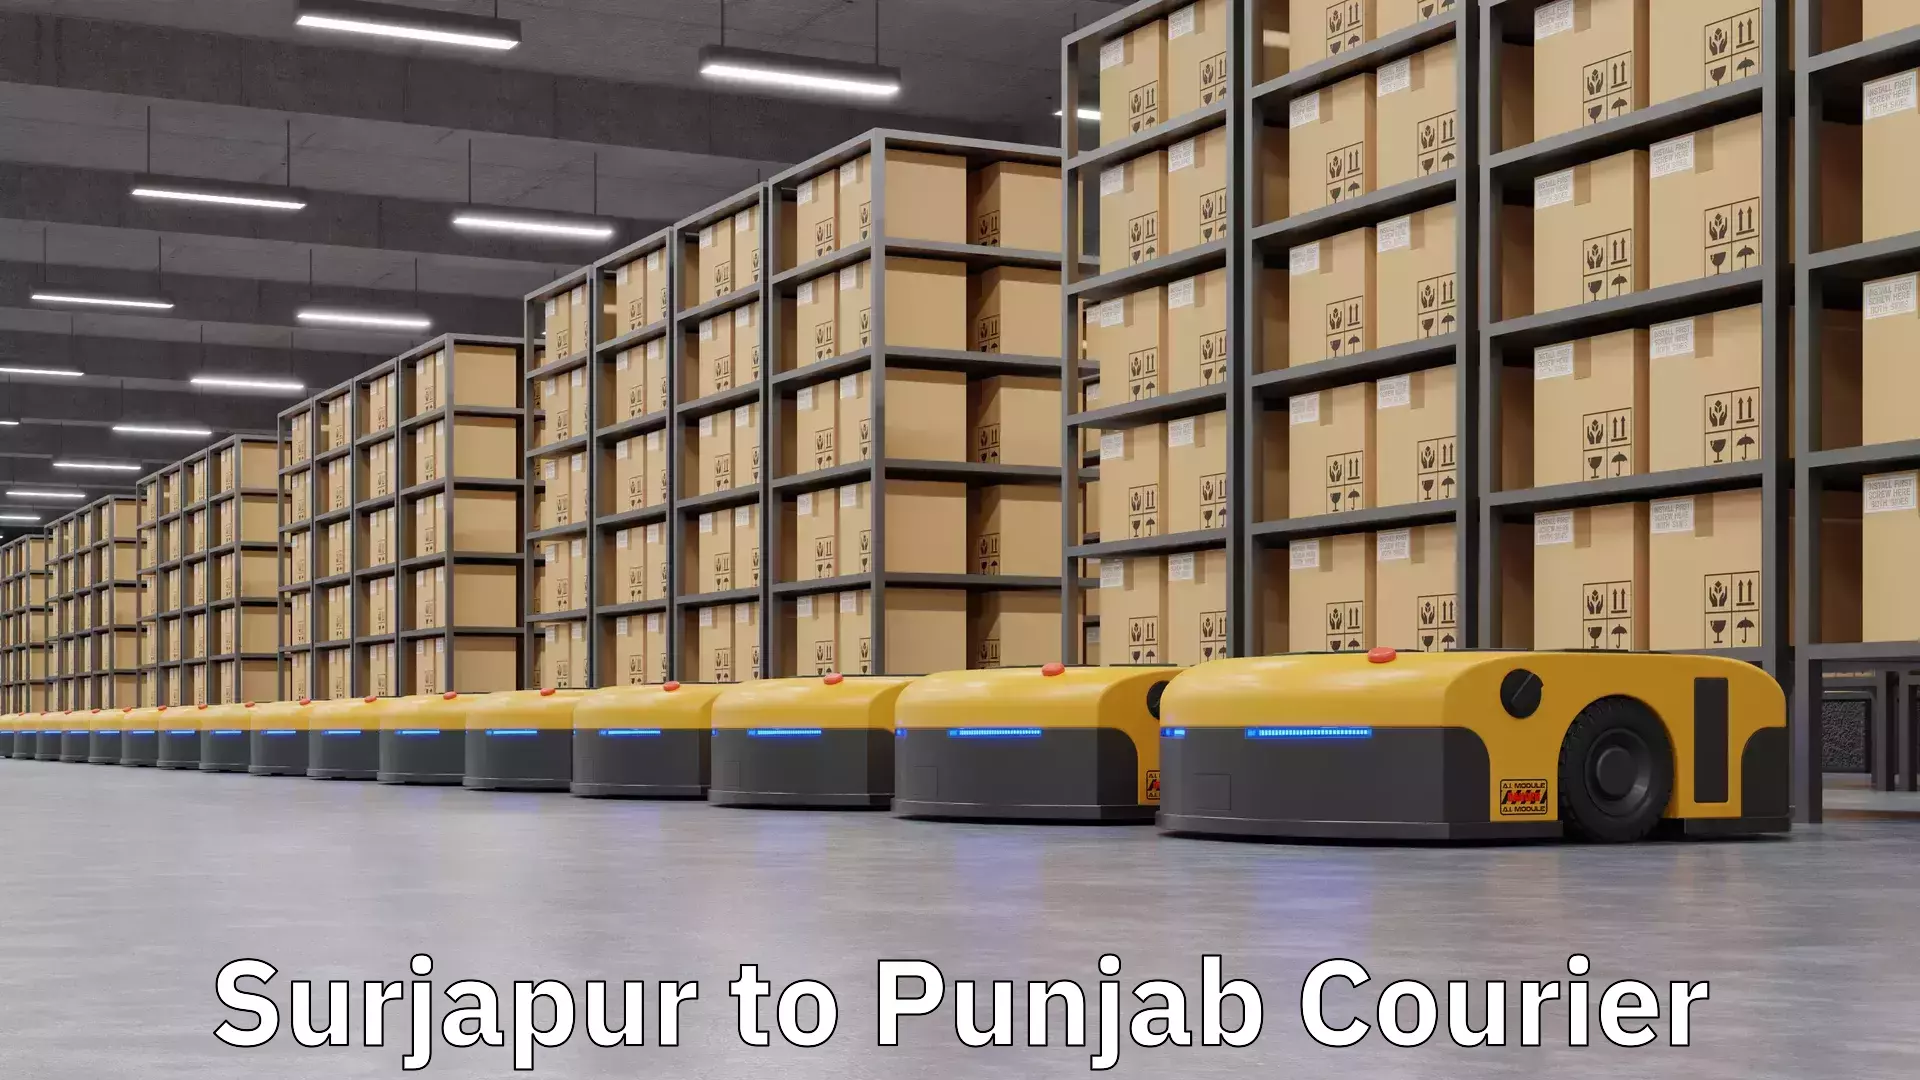 Residential courier service Surjapur to Punjab